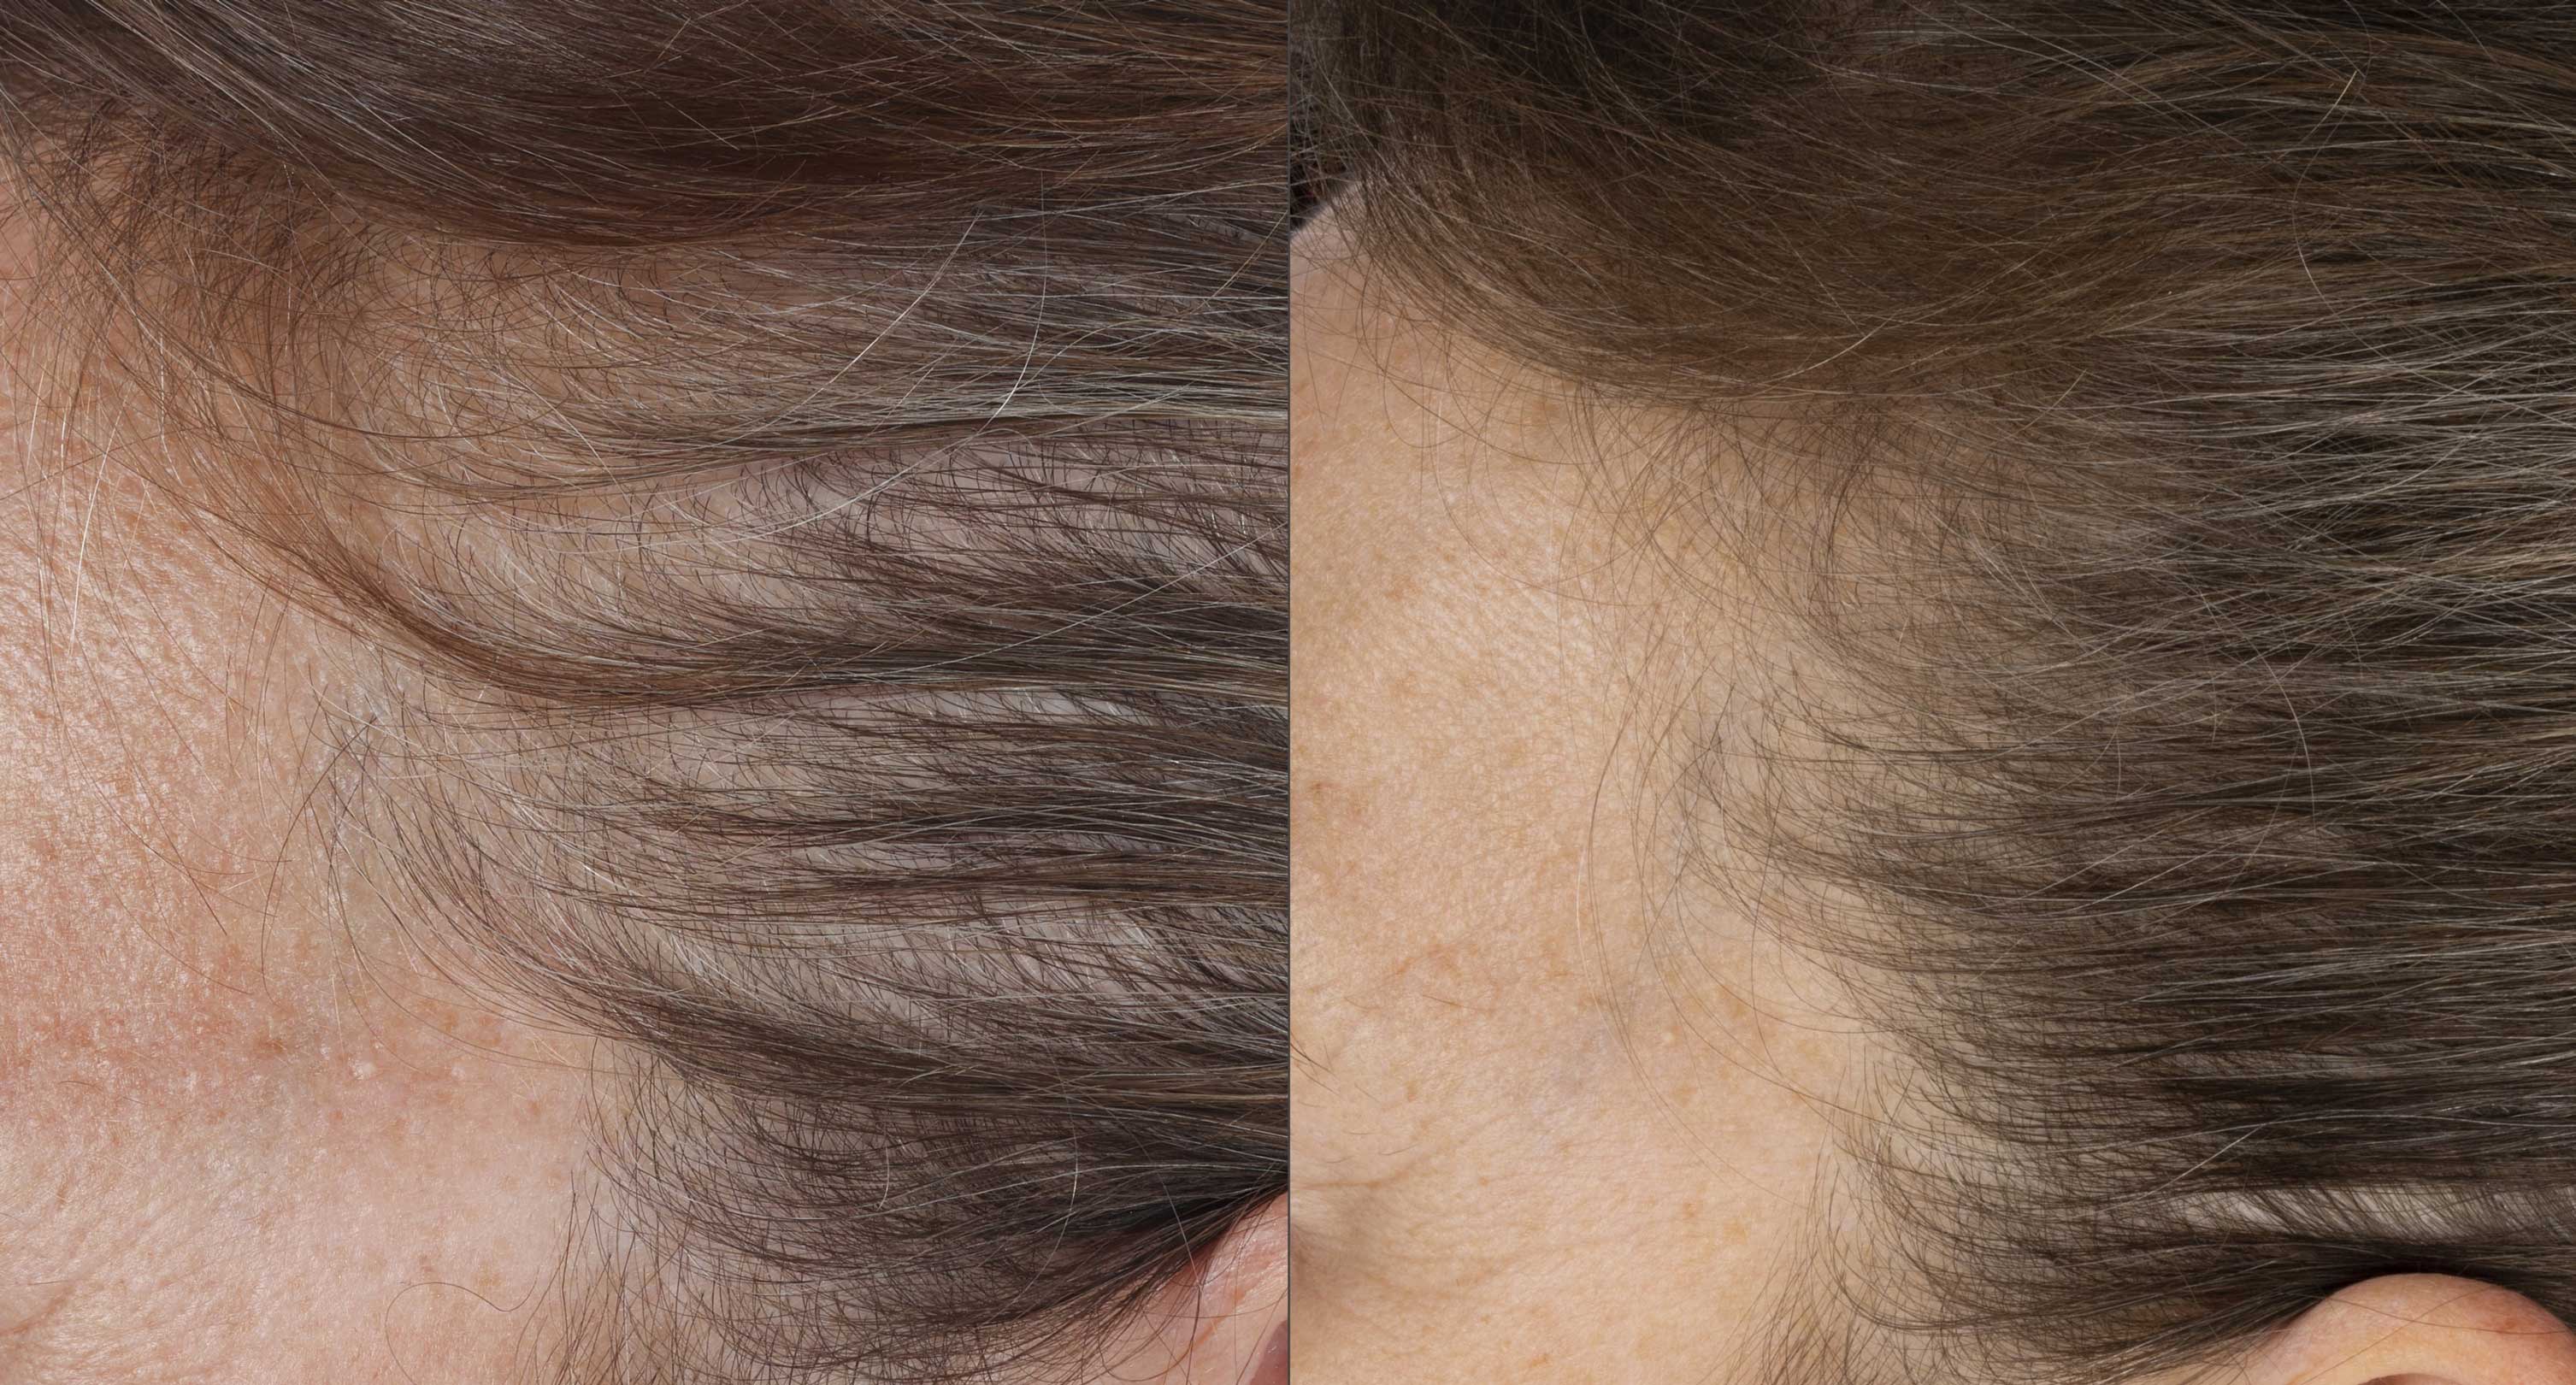 Close up of before and after image of brown haired woman with thin hair and hair growth results over 16 weeks. 